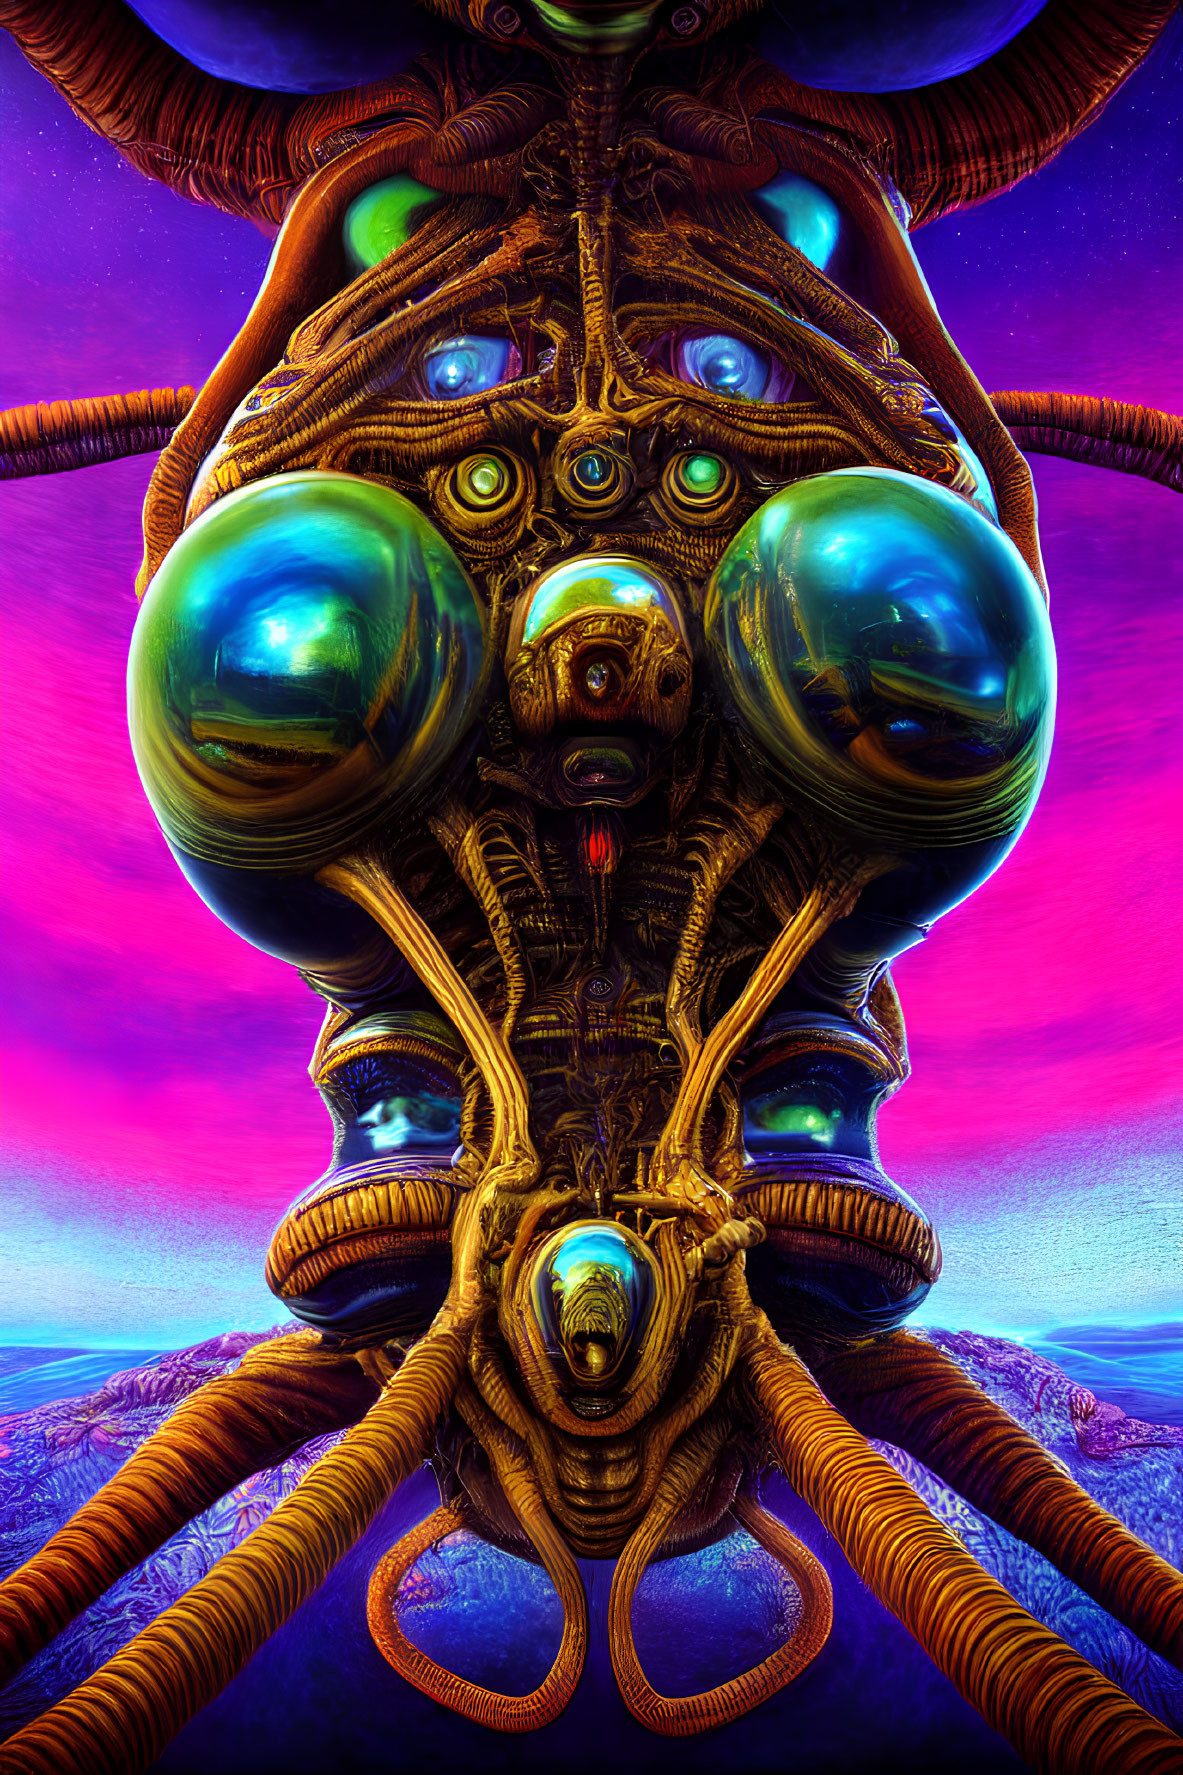 Colorful alien entity with reflective orbs and tentacle-like structures in surreal sky